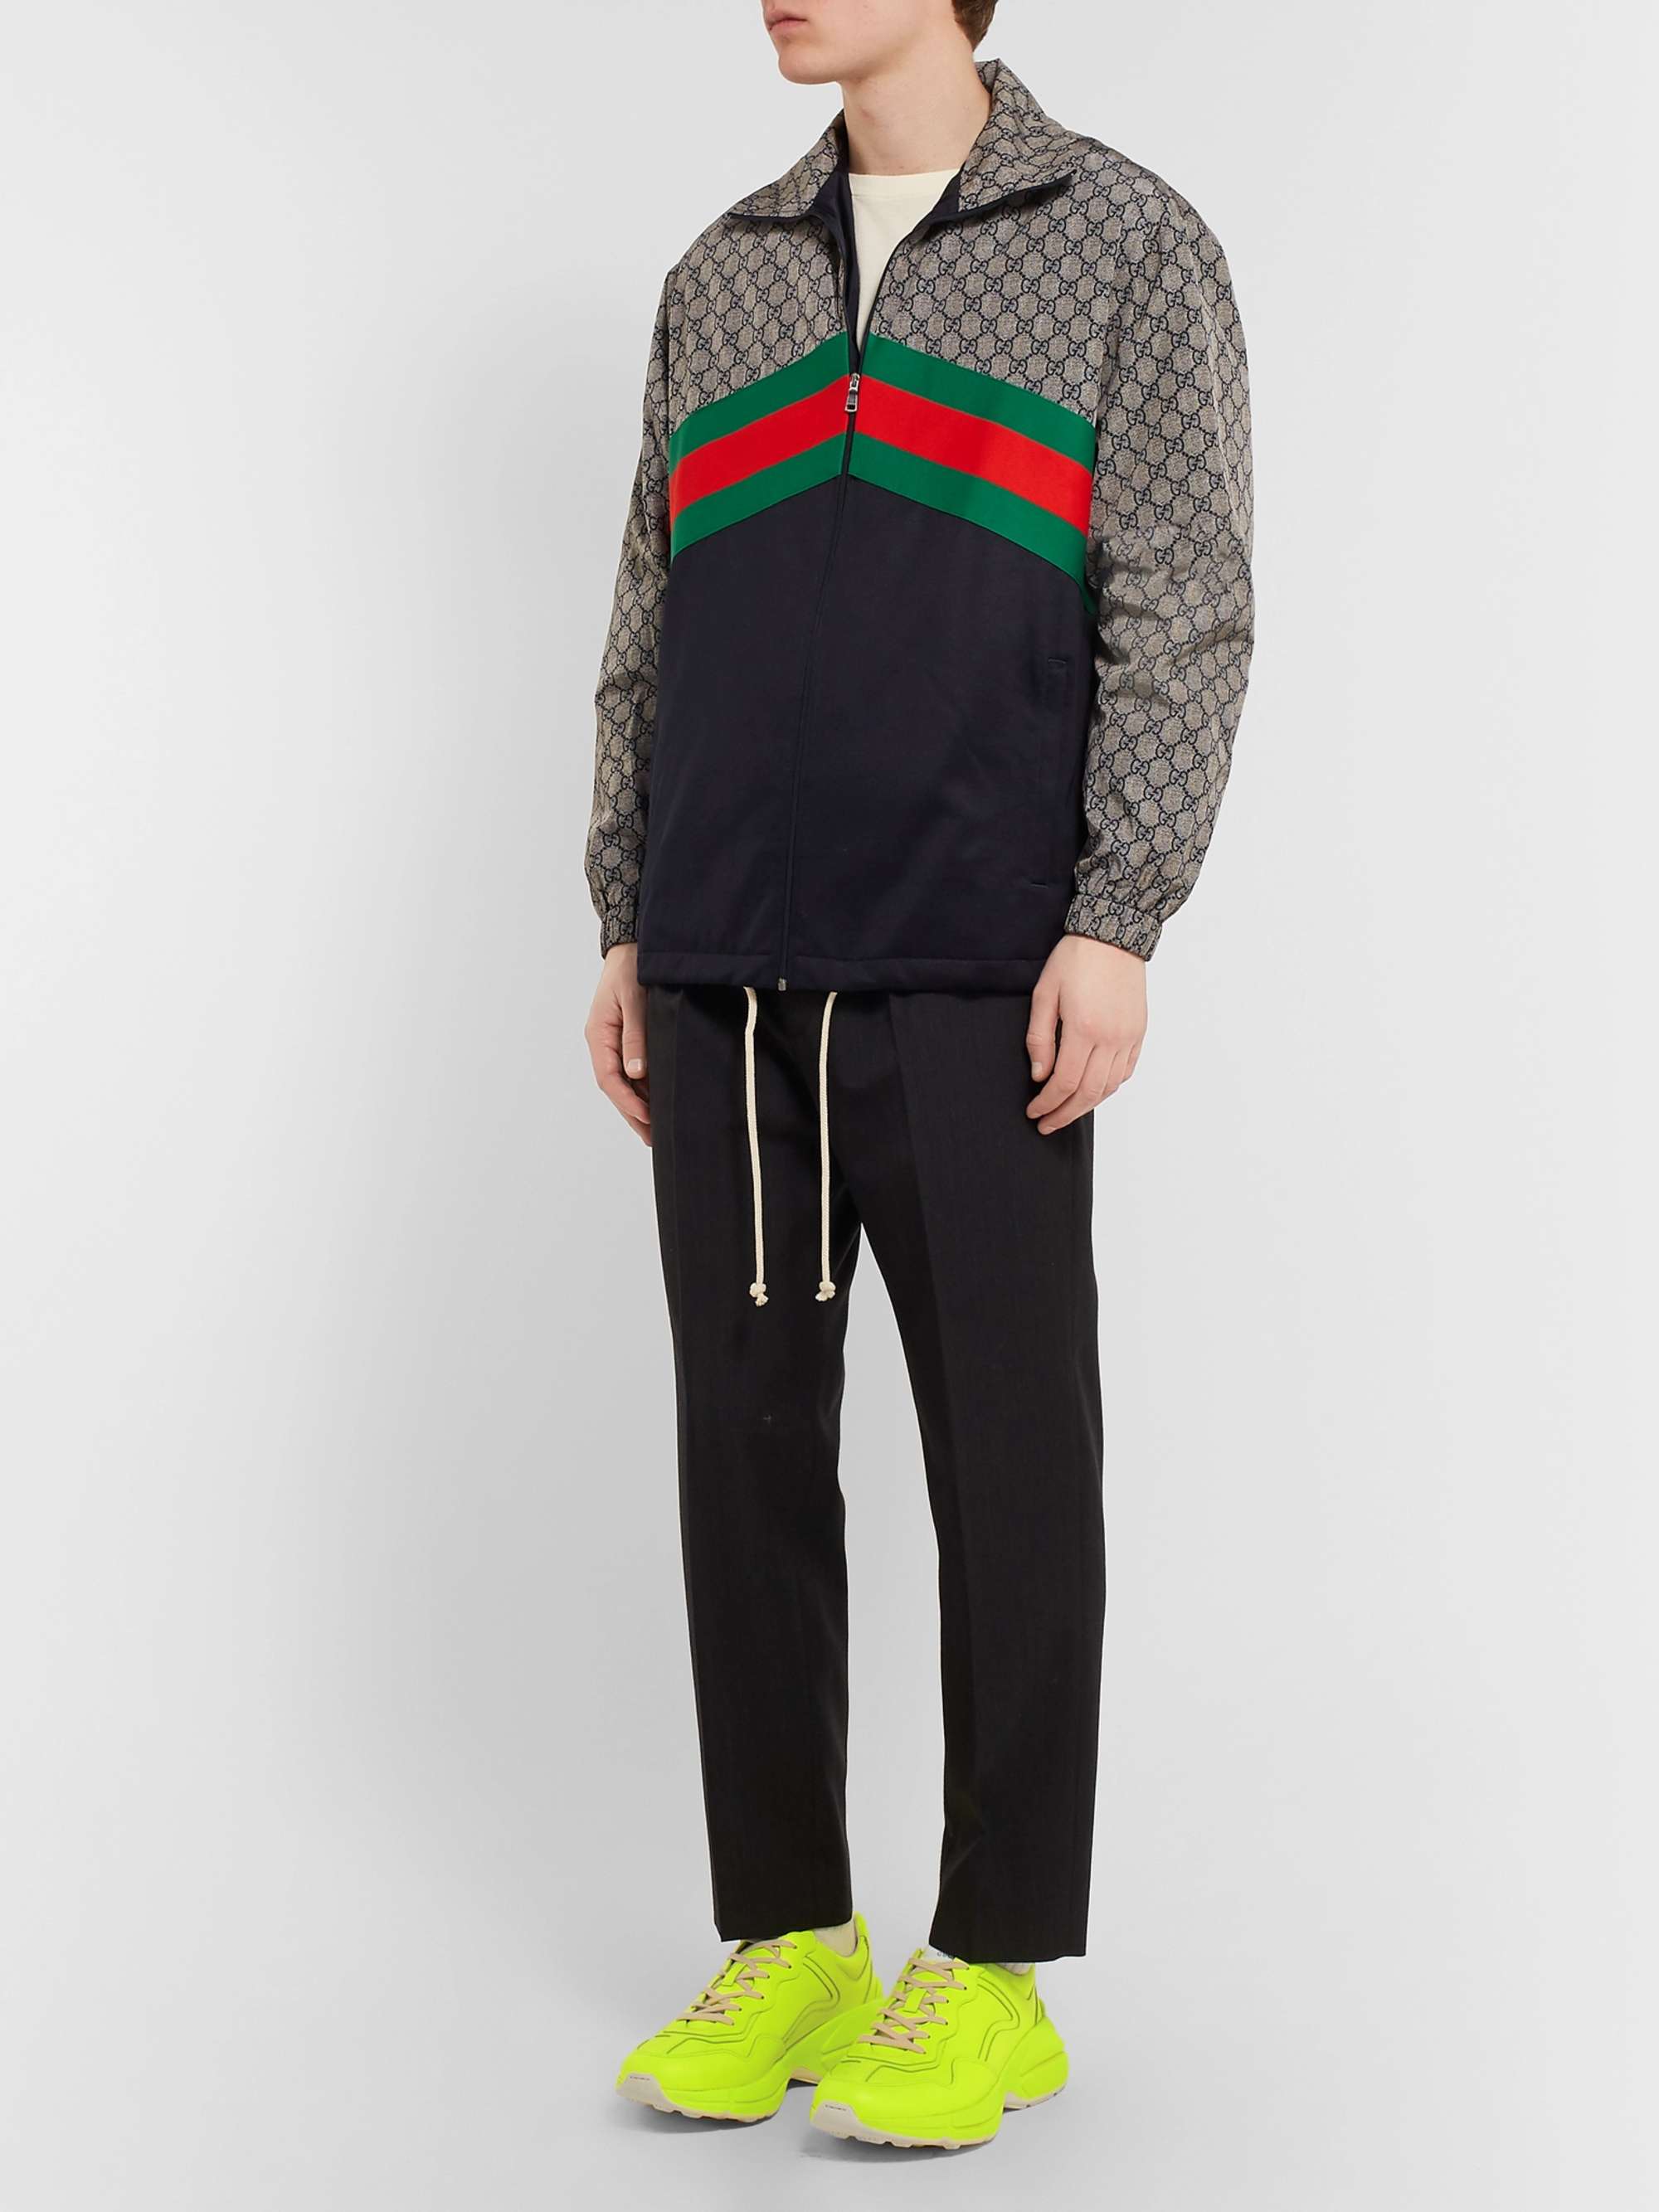 GUCCI Rhyton Leather Sneakers | MR PORTER